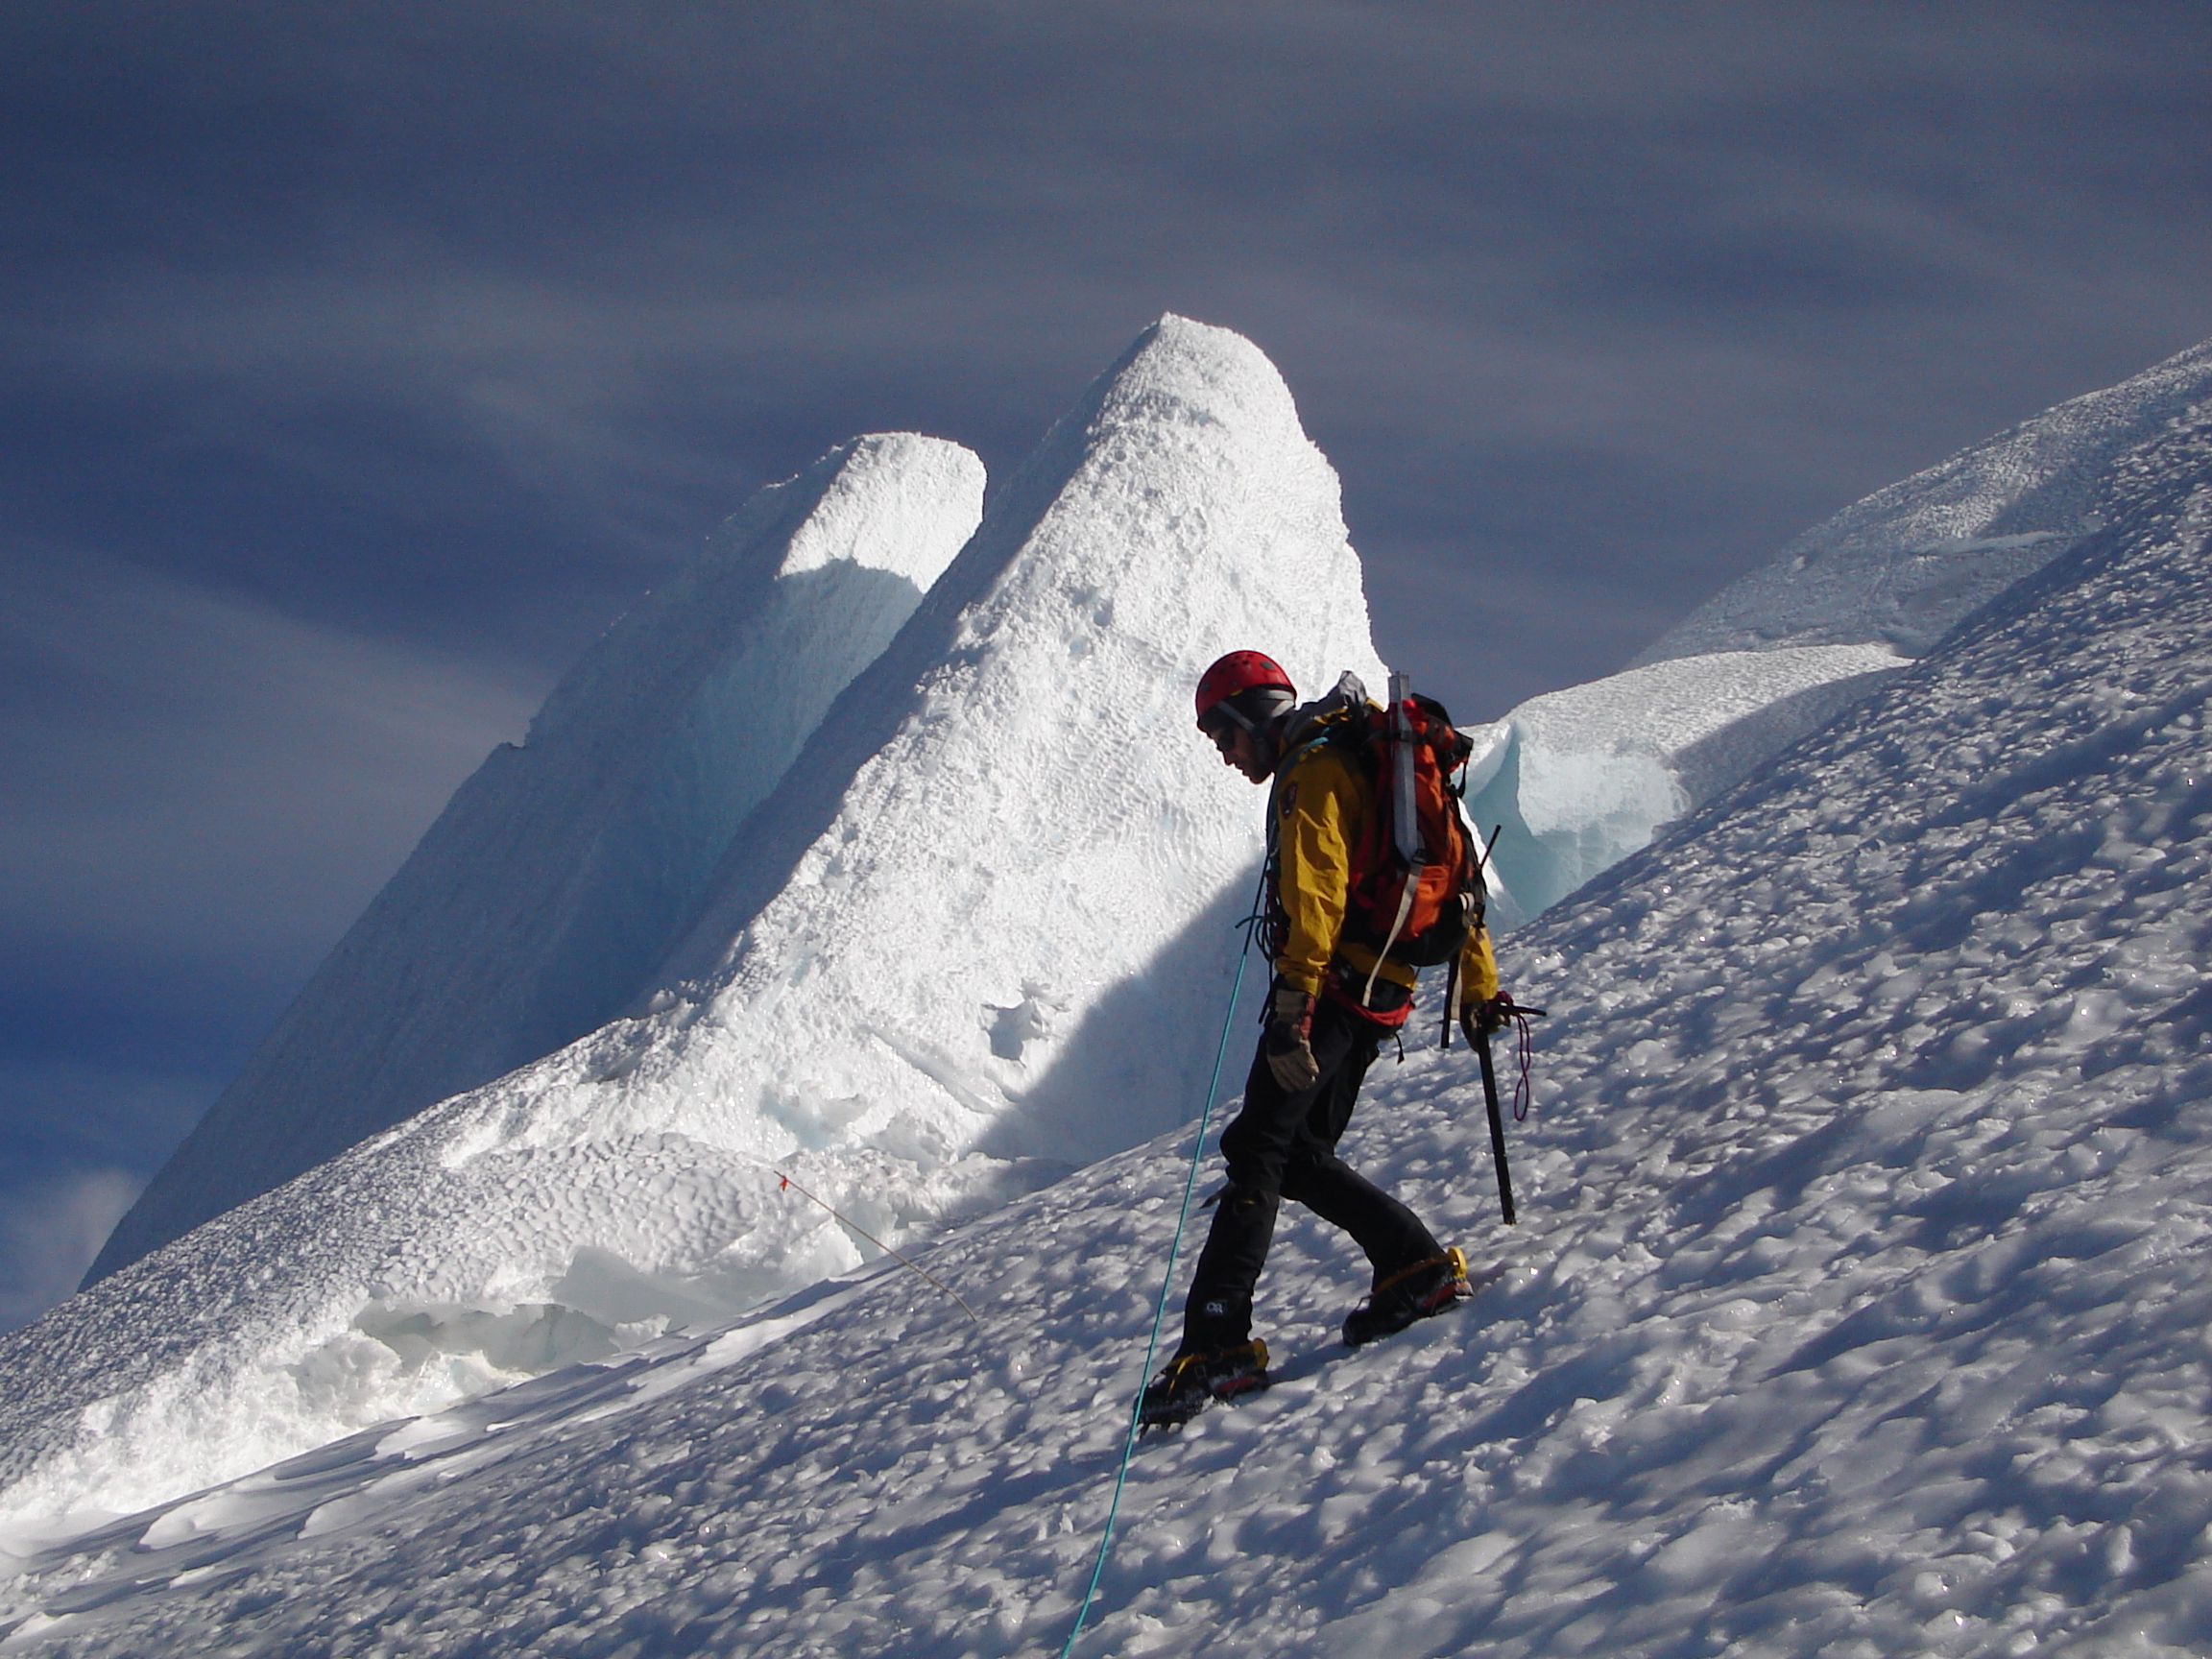 Climber on glacier steps downward with icy crags in background.